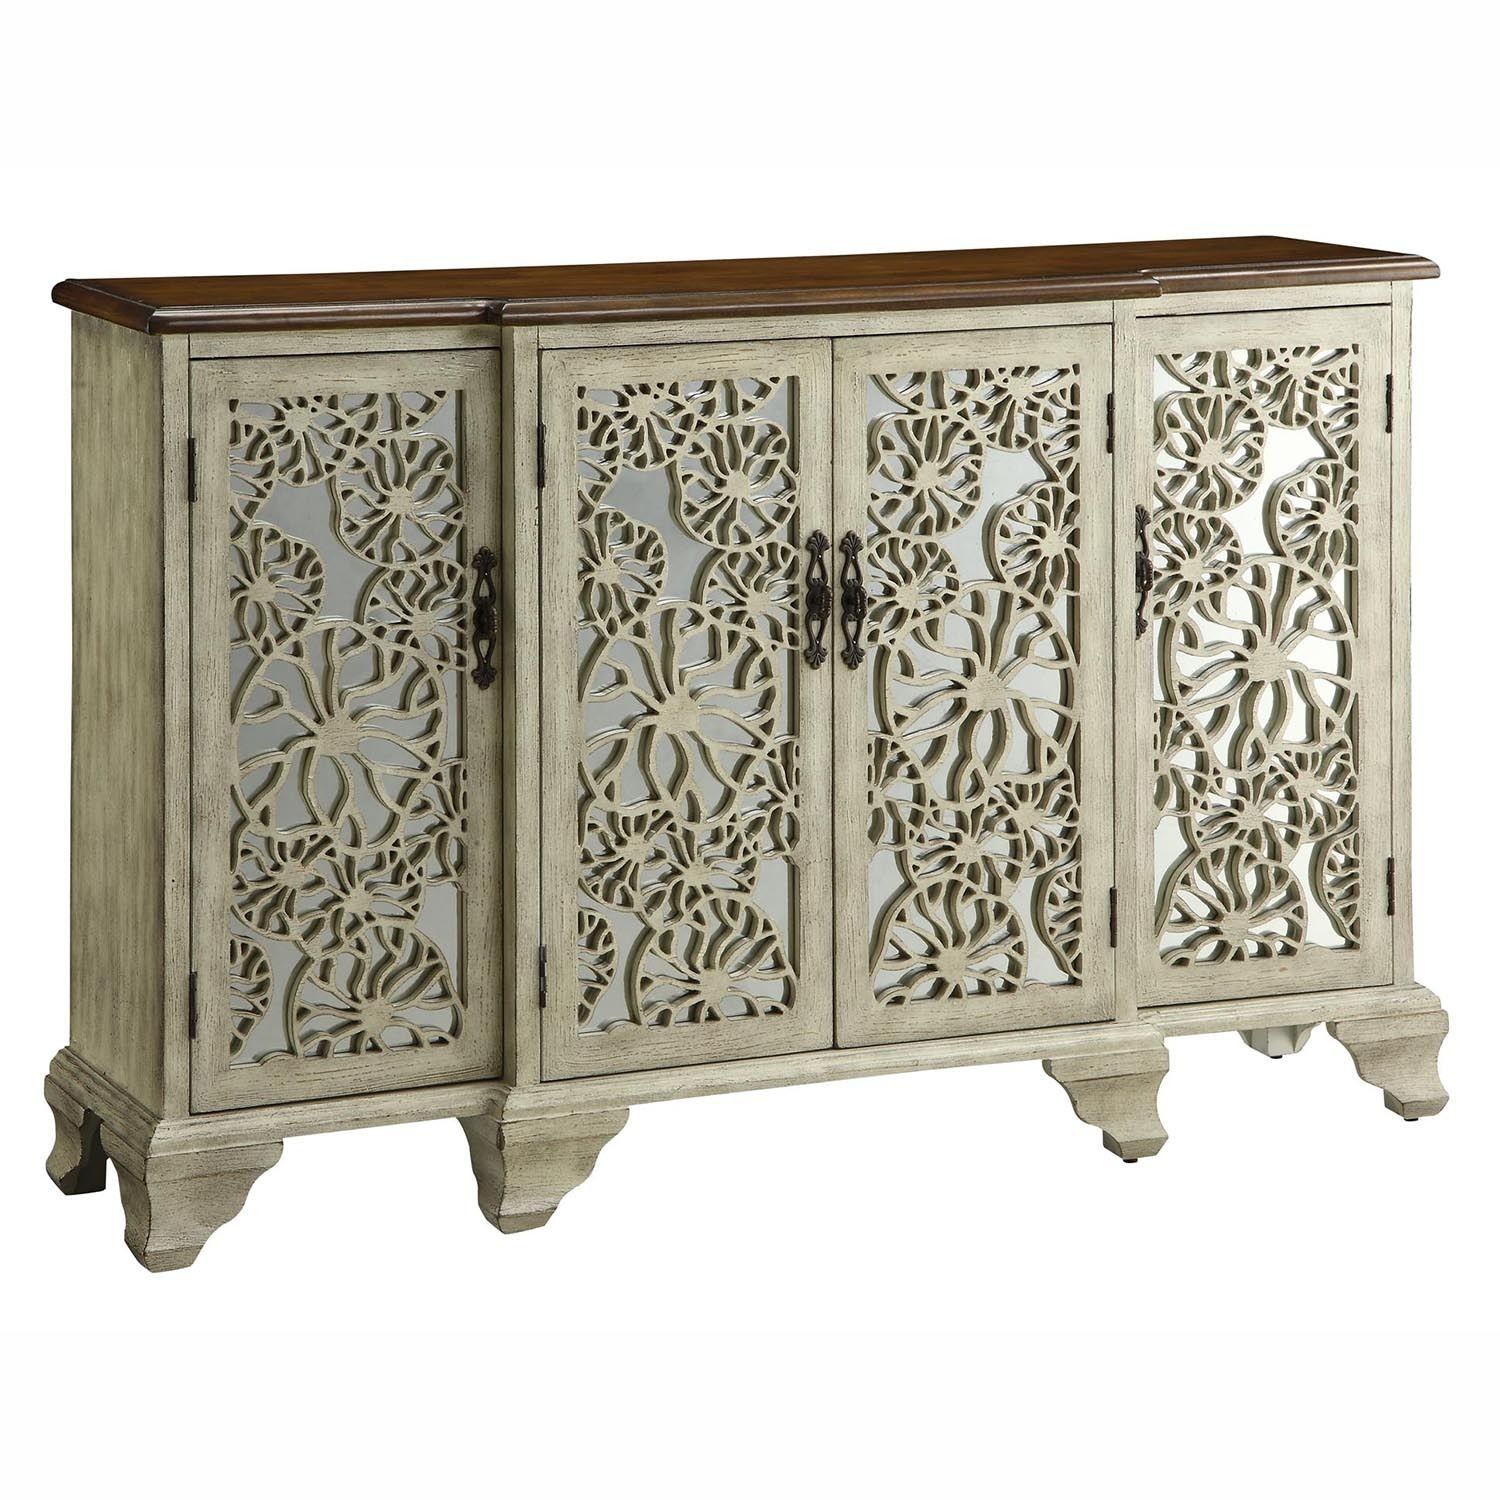 Gorgeous Antique White Wood 4 Mirrored Doors Sideboard Buffet With Regard To Most Up To Date Aged Mirrored 2 Door Sideboards (View 9 of 20)